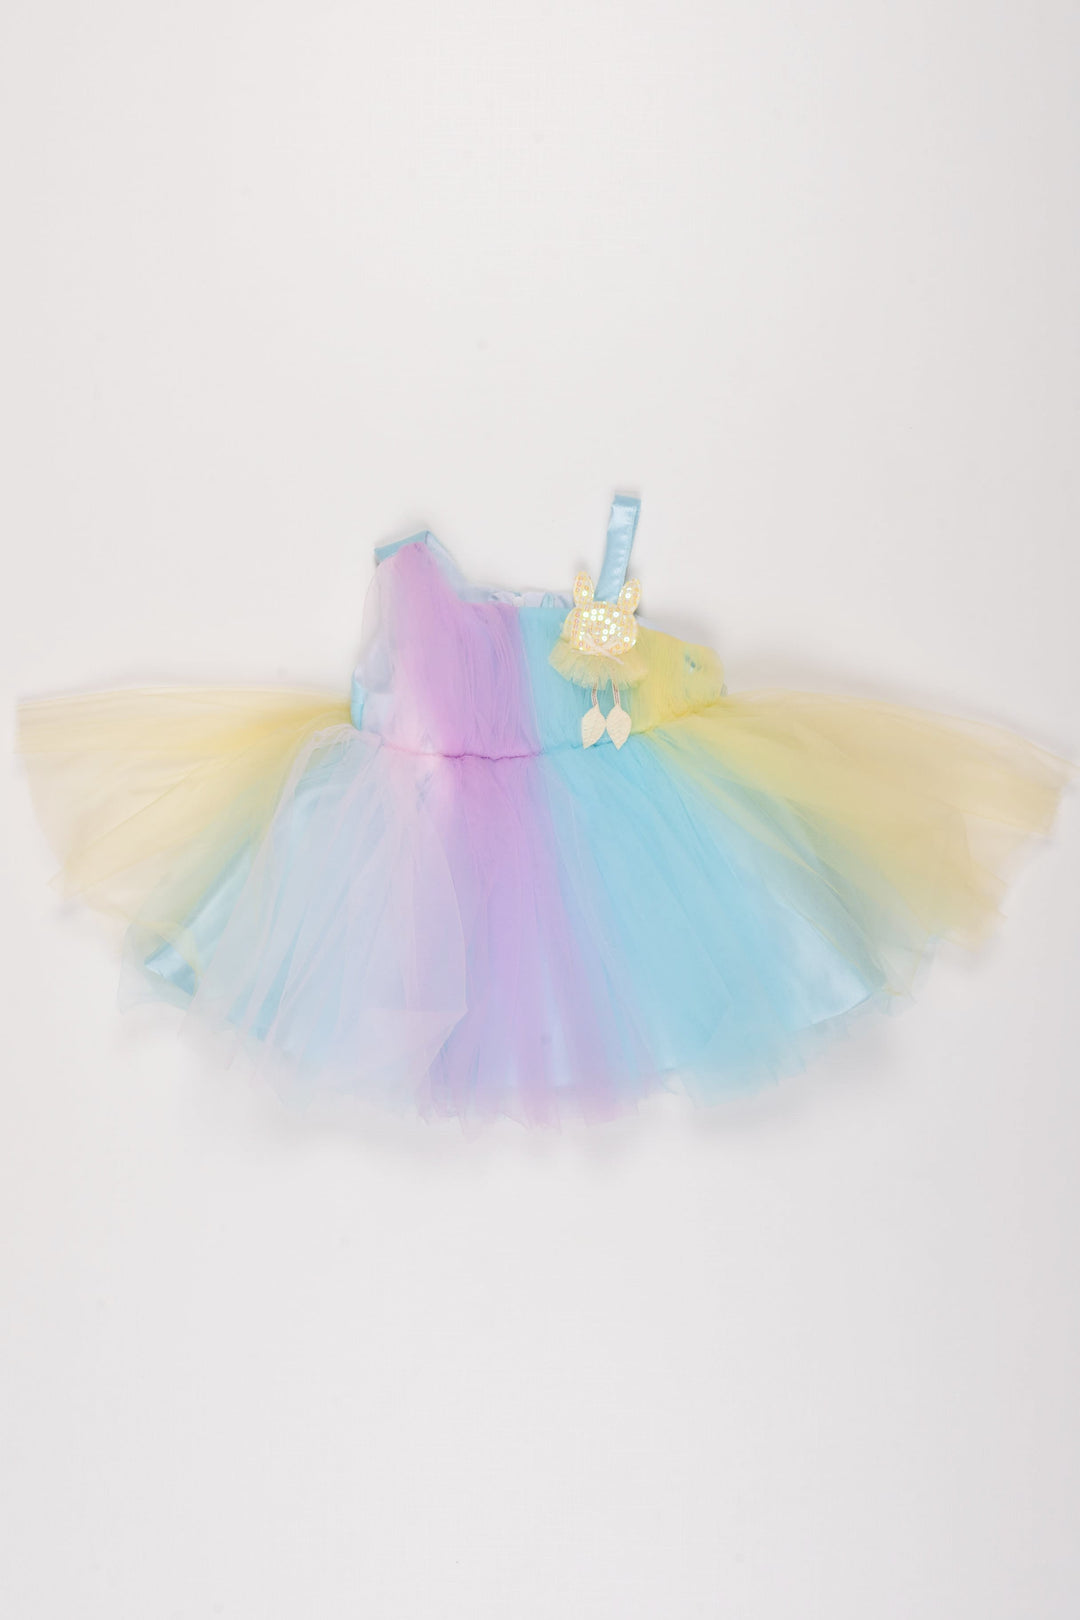 The Nesavu Girls Tutu Frock Enchanted Pastel Tulle Party Dress with Butterfly Accent for Girls Nesavu 12 (3M) / Blue / Plain Net PF167A-12 Girls Pastel Tulle Dress | Magical Butterfly Party Dress for Kids | The Nesavu